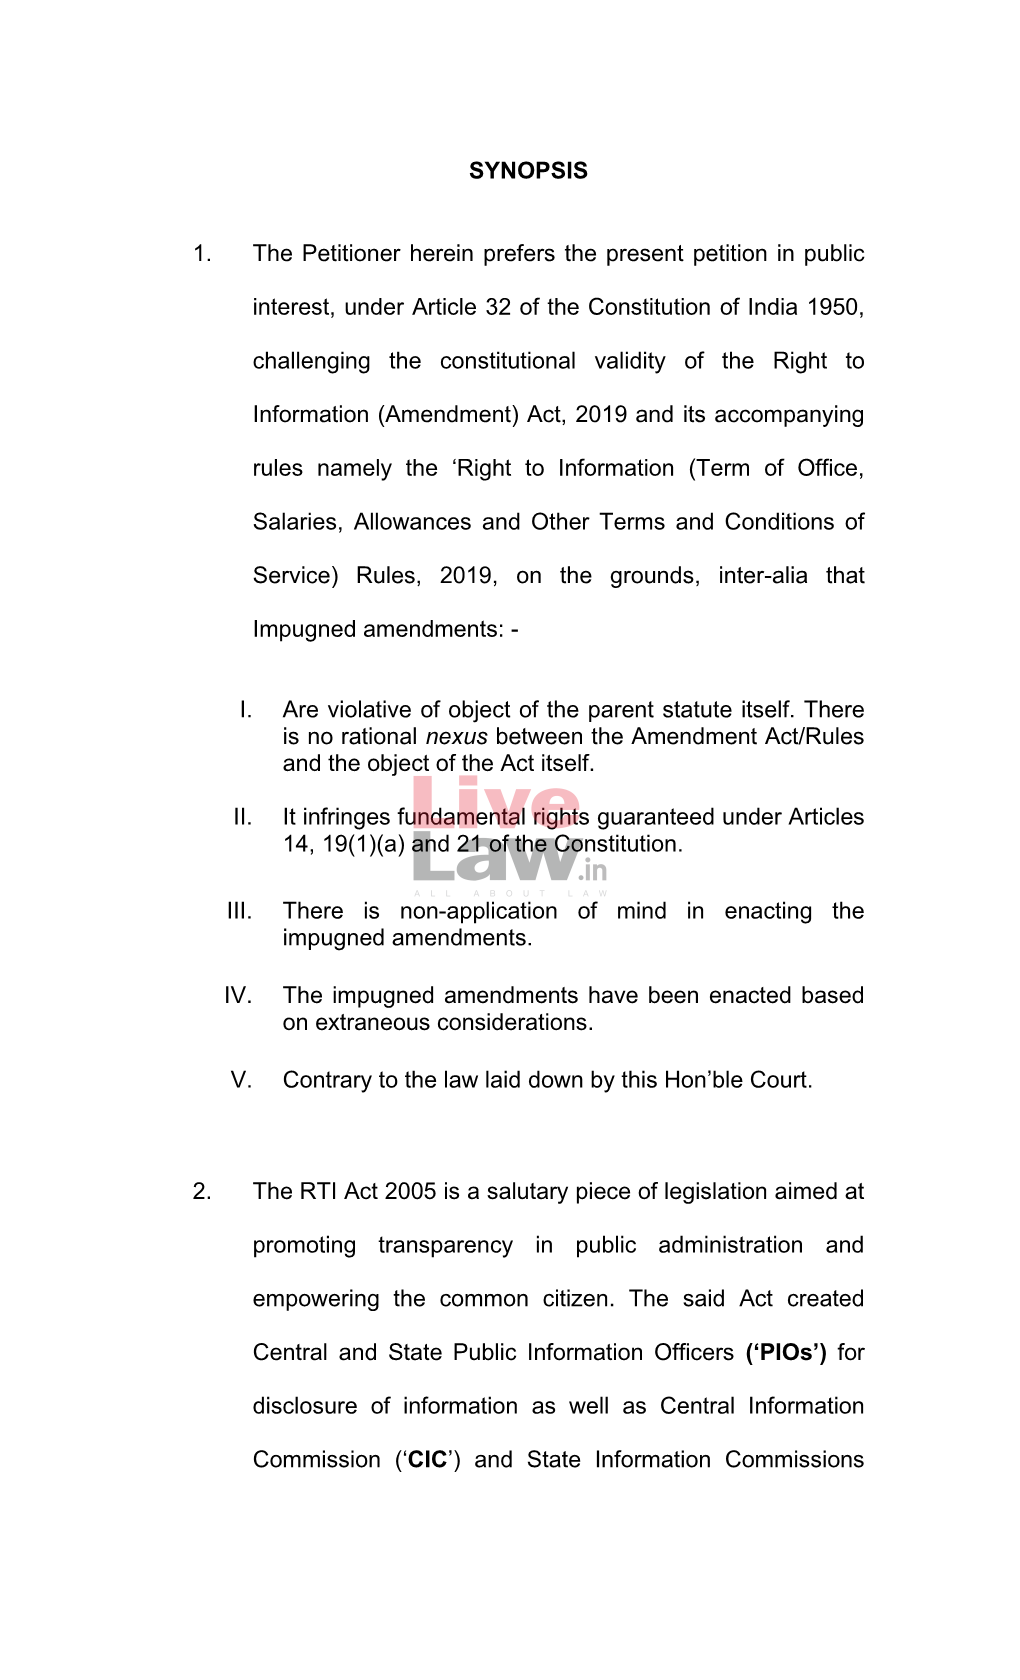 SYNOPSIS 1. the Petitioner Herein Prefers the Present Petition in Public